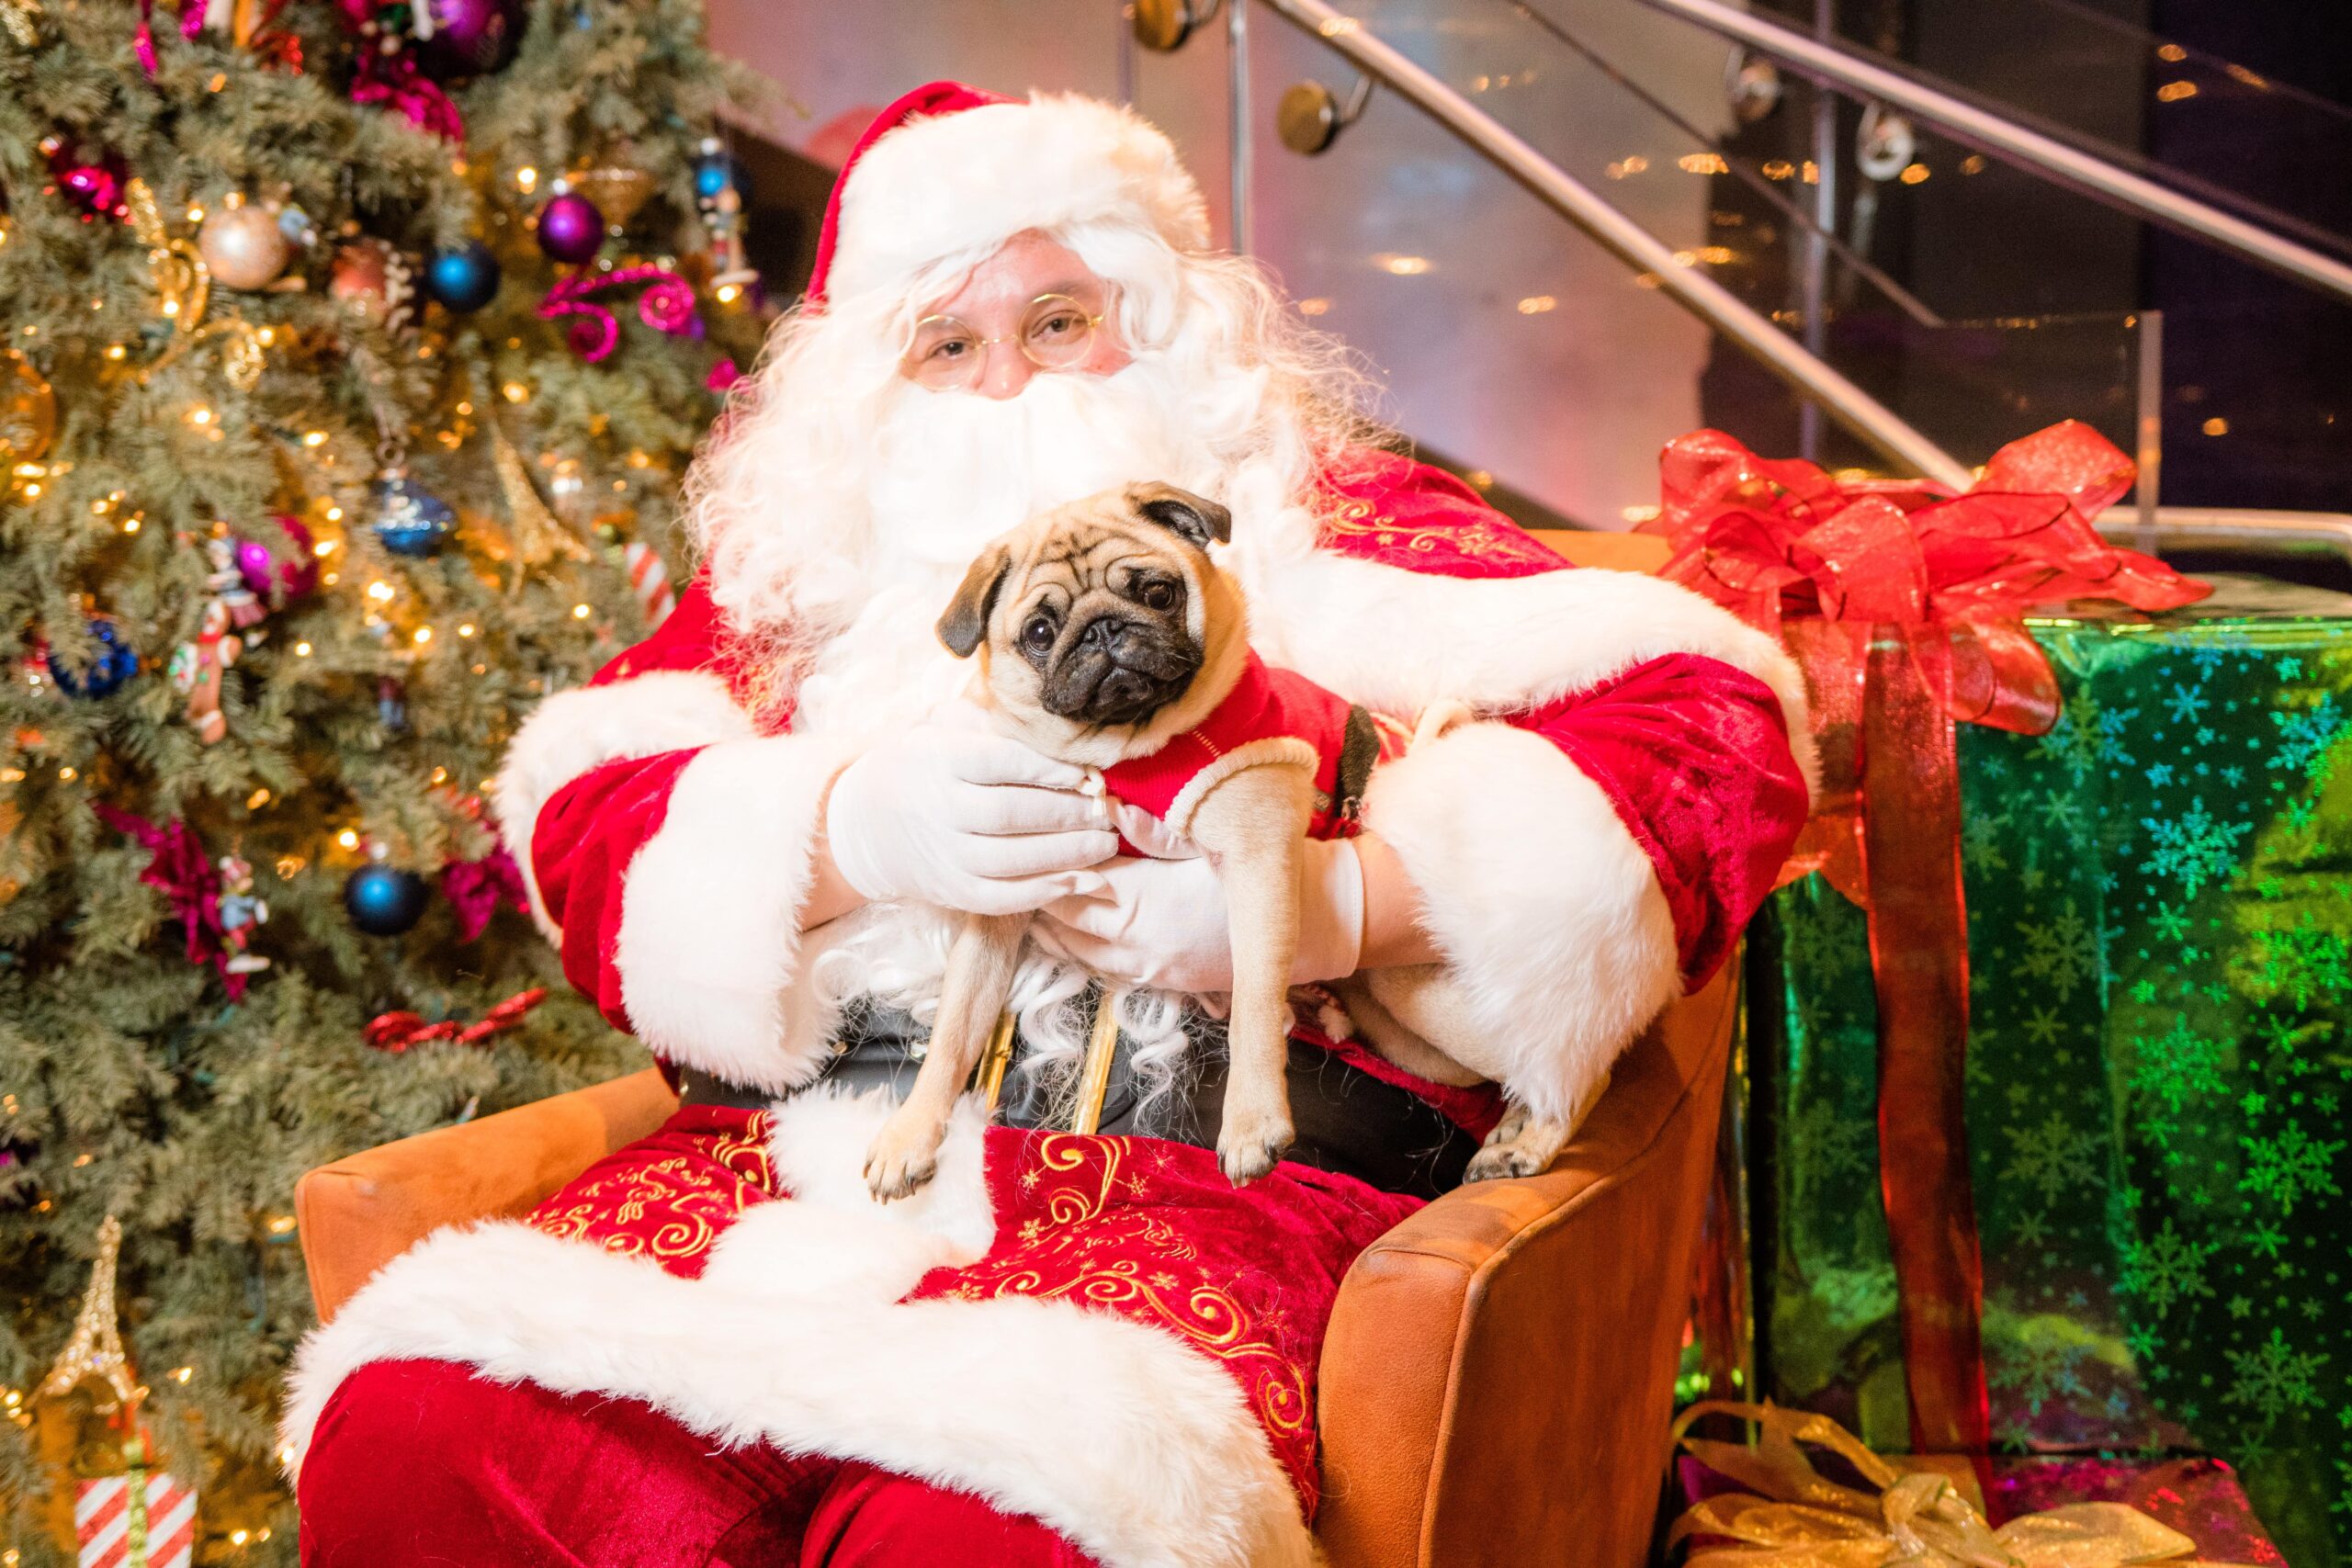 An image of a dog's pictures with Santa.